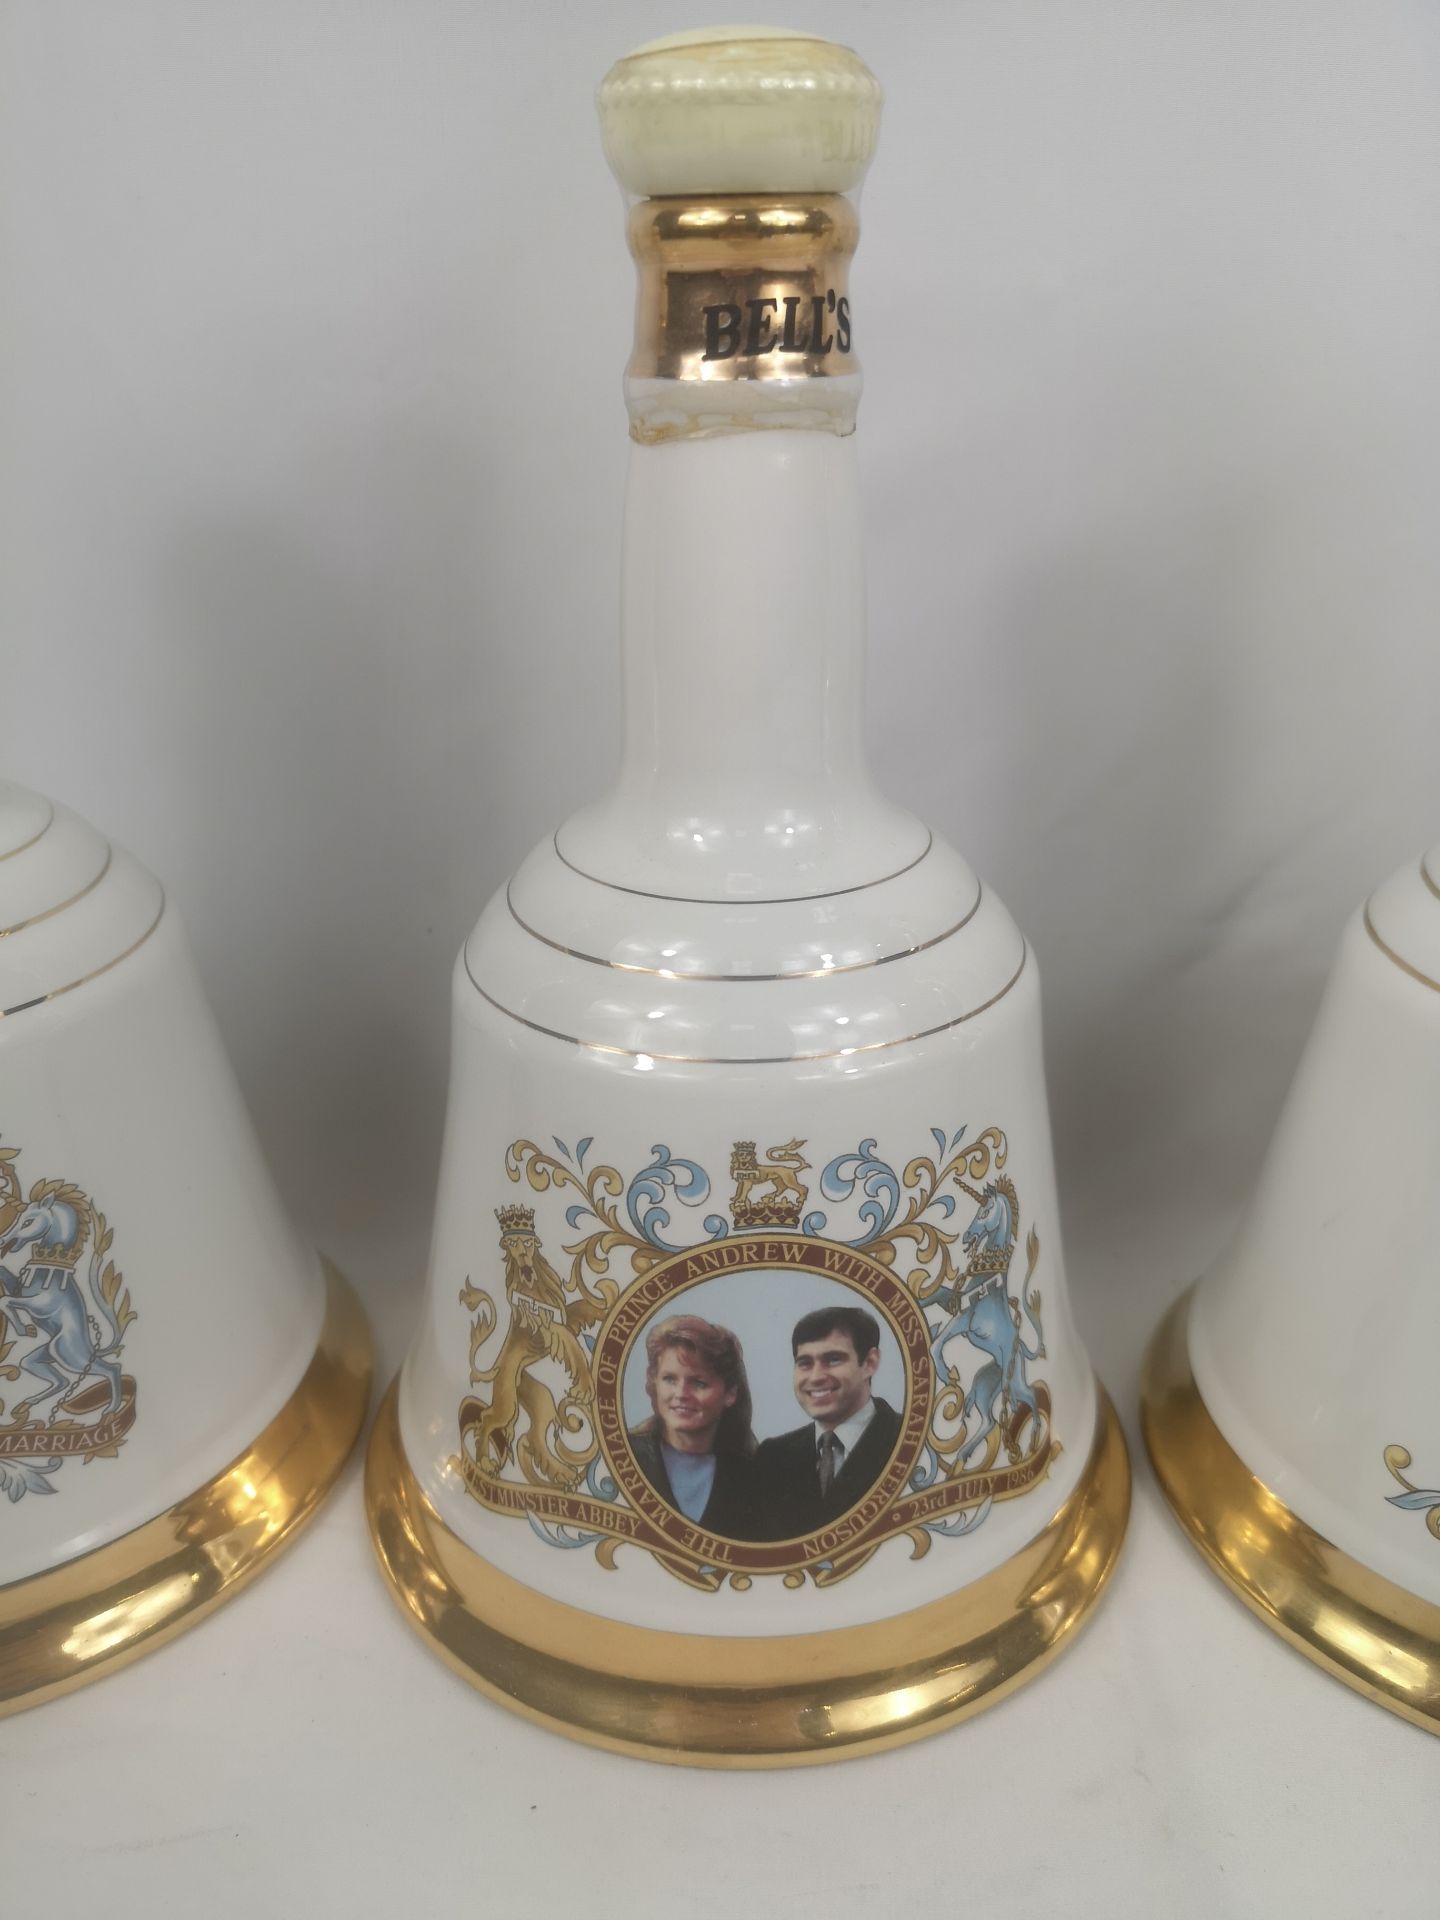 Three Bells porcelain whisky decanters, bottle of House of Commons Armagnac - Image 3 of 6